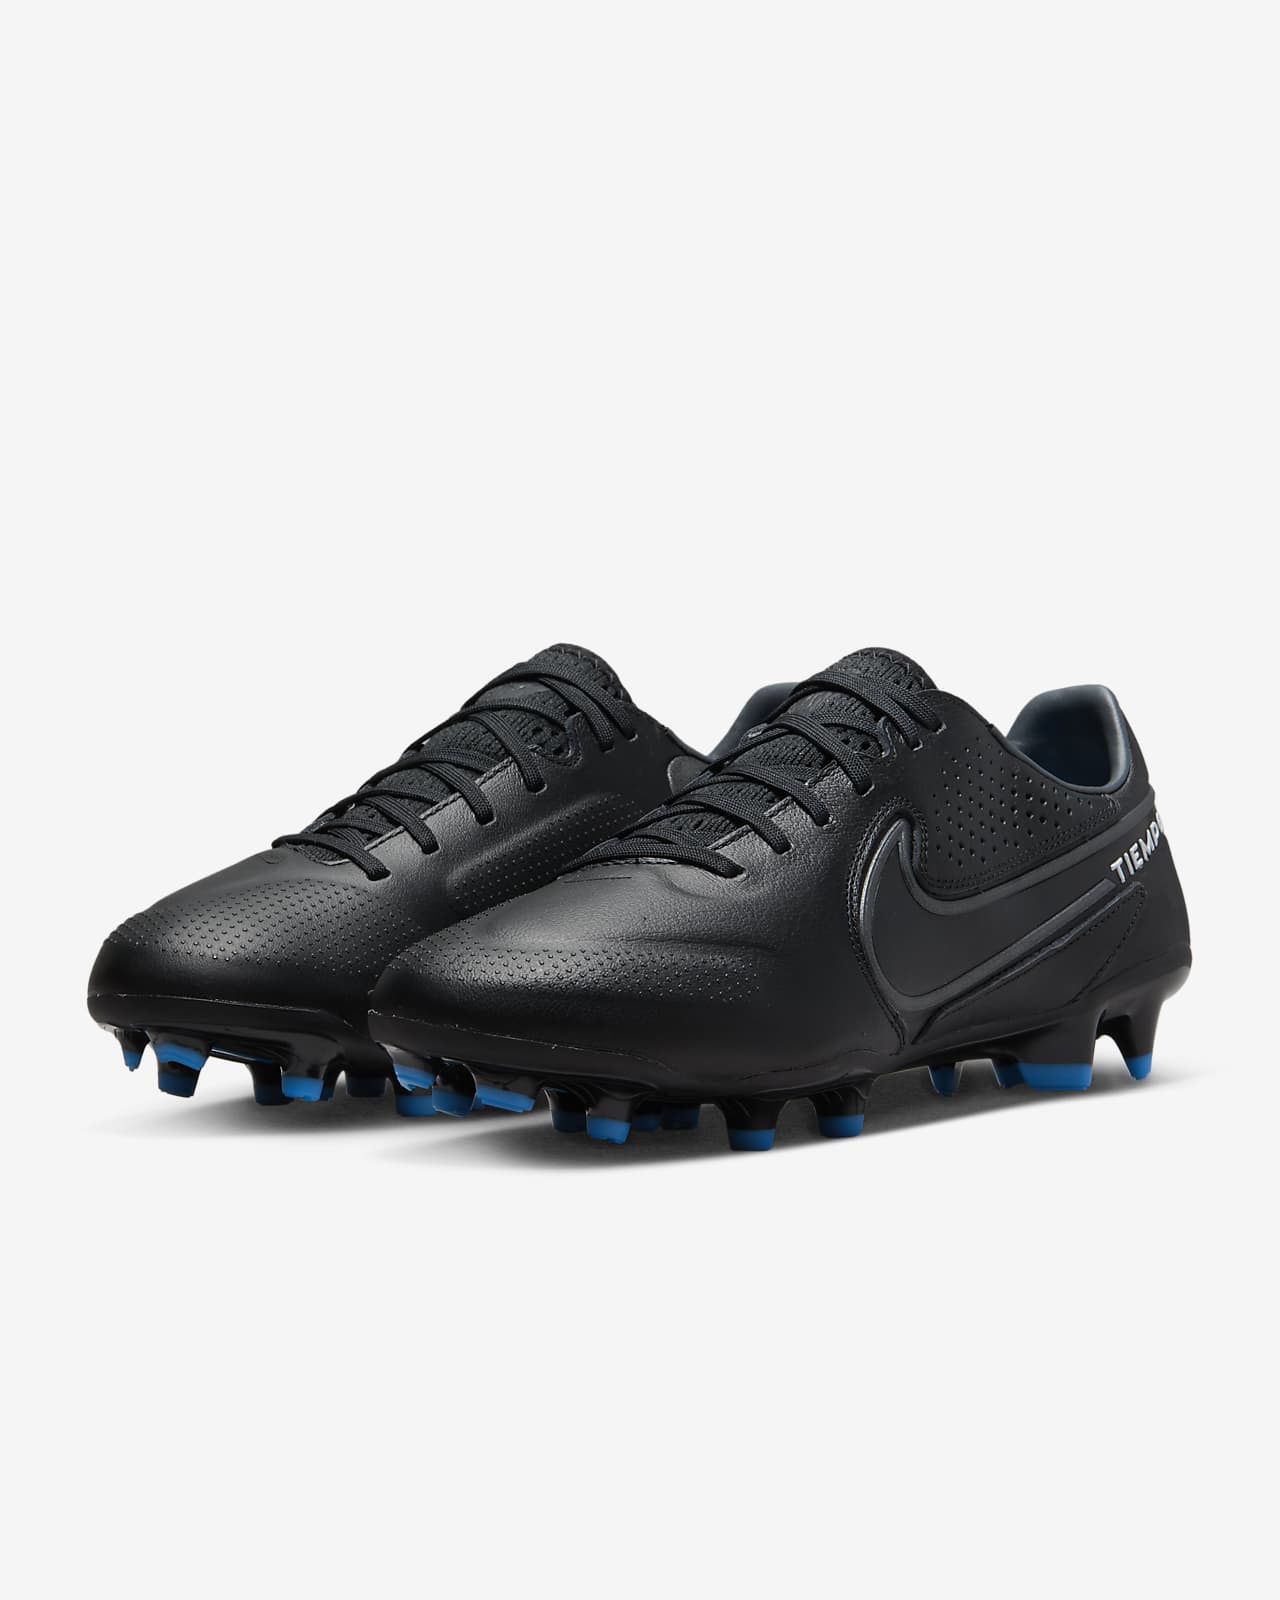 Tiempo 9 Pro FG Firm-Ground Soccer Cleat. Nike.com